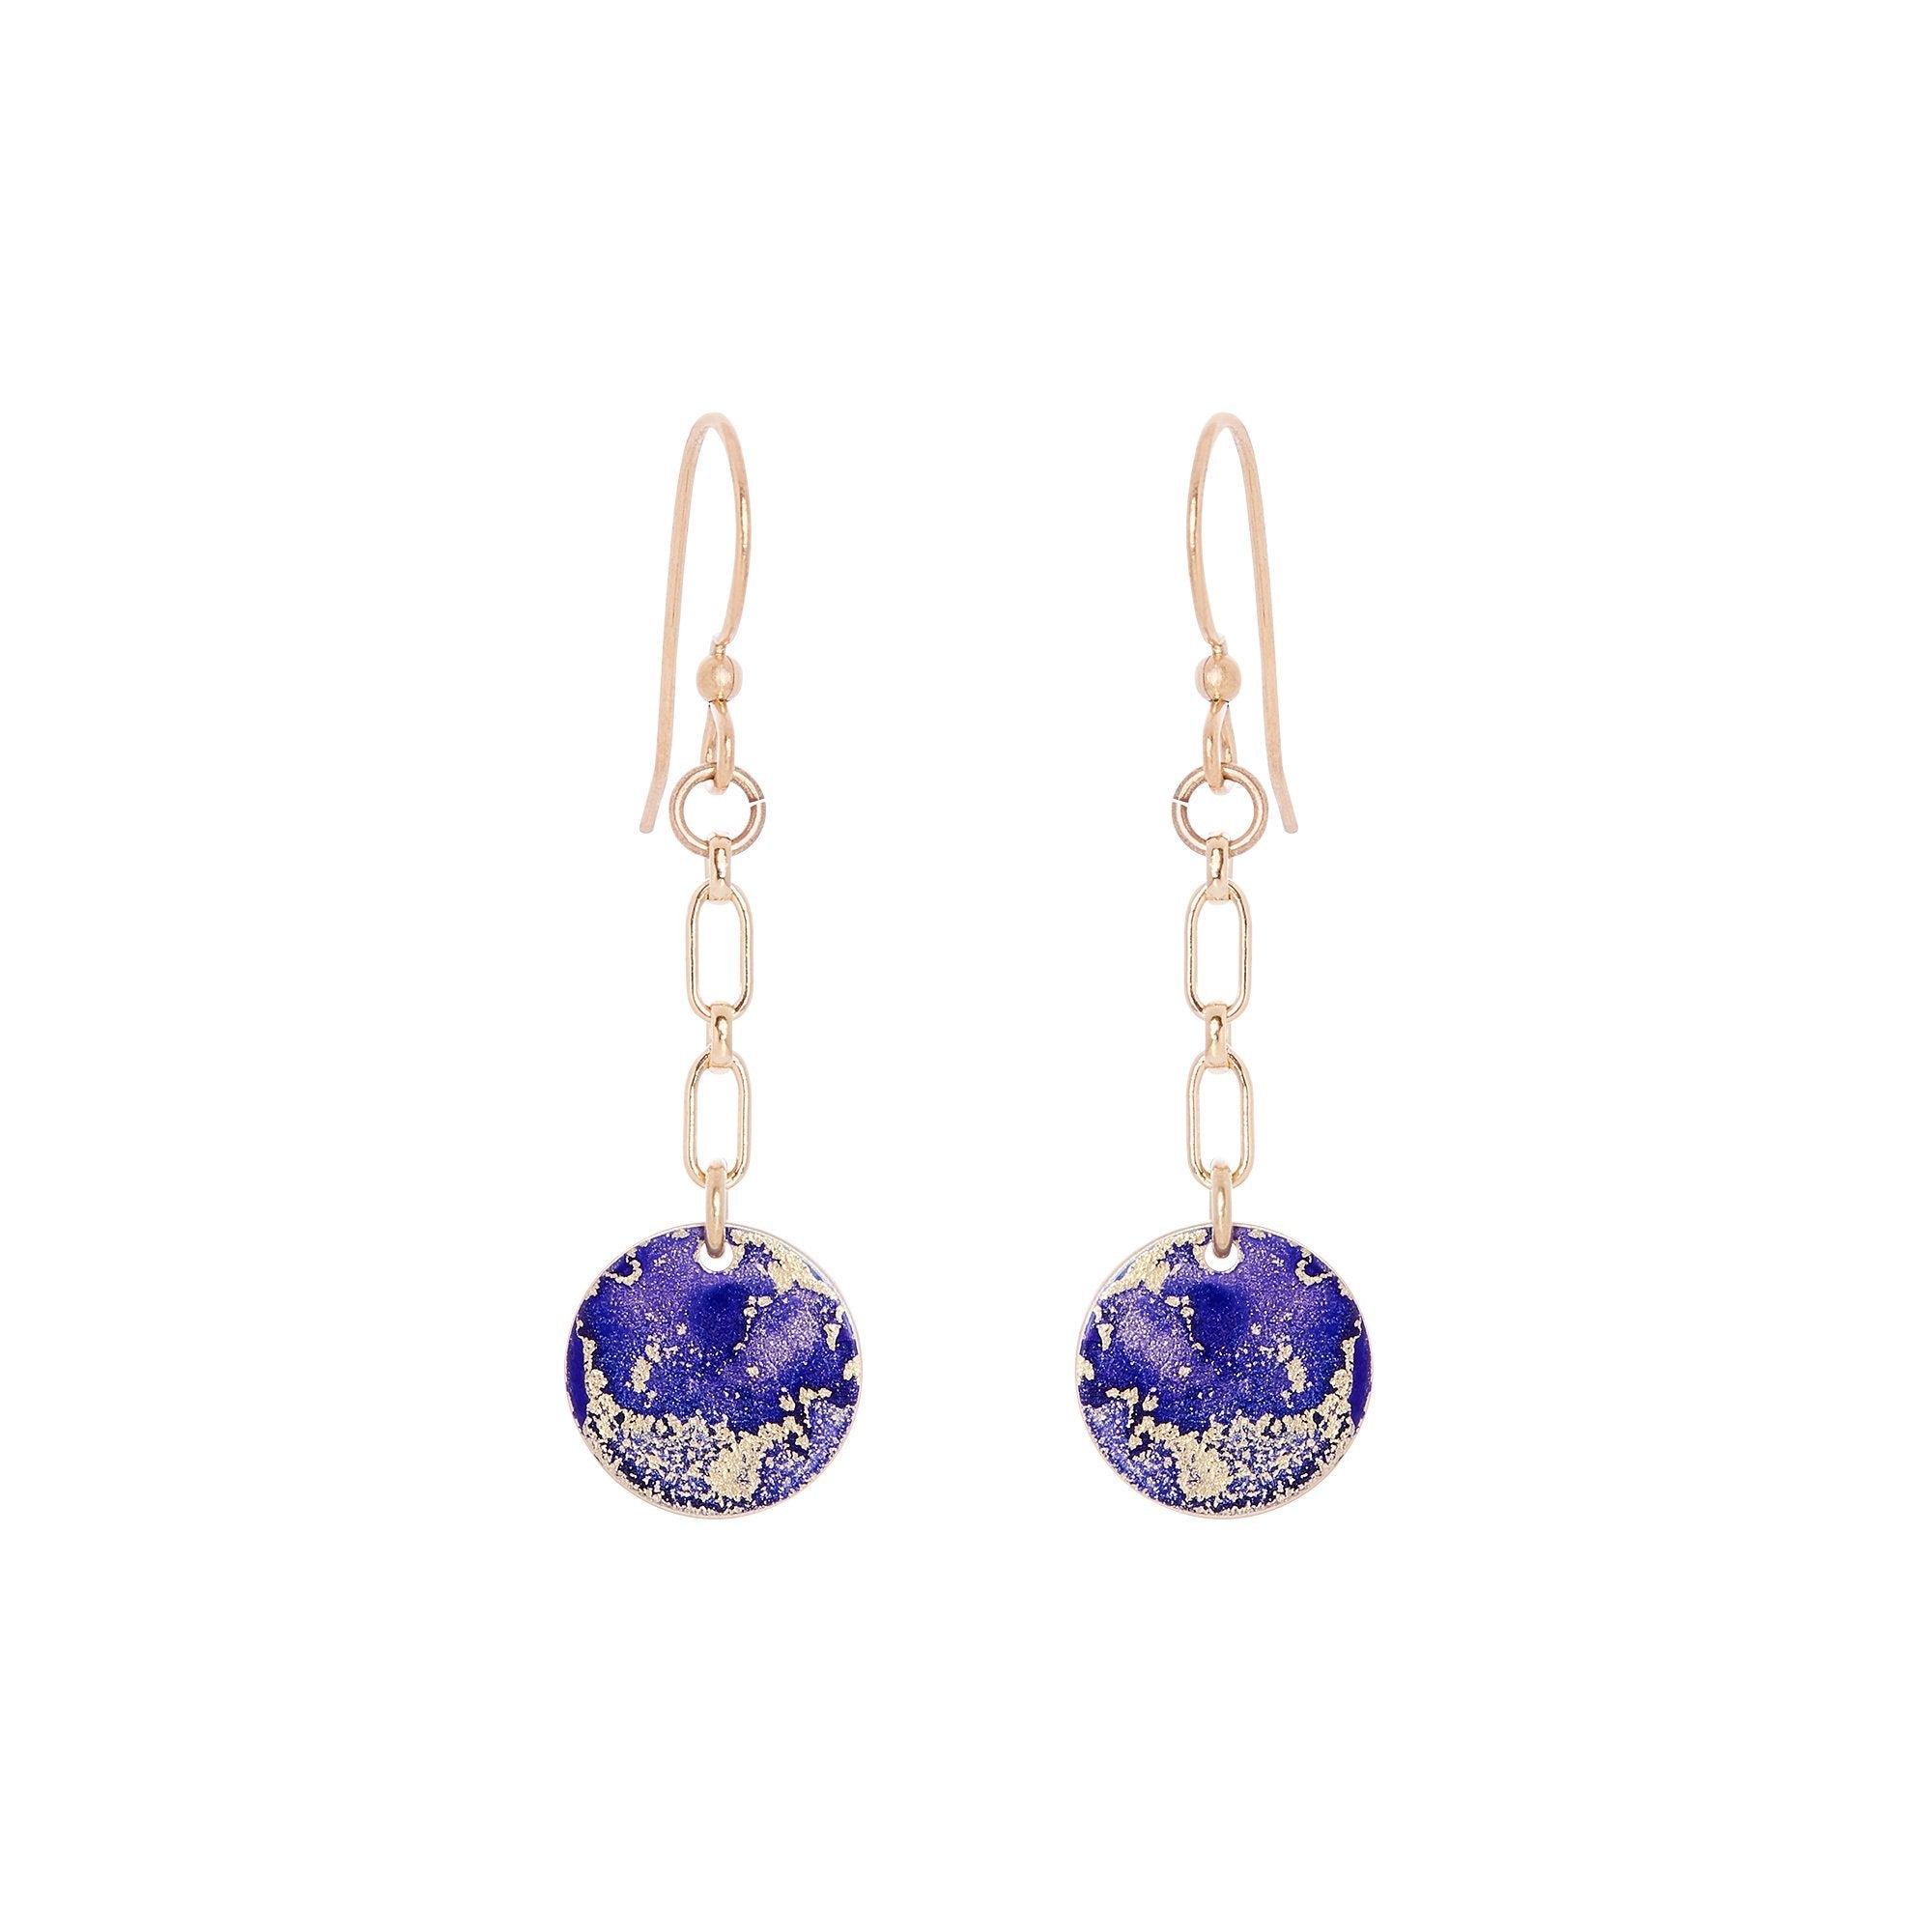 14K Gold Plated Petit Dangle Earrings - Available in More Colors